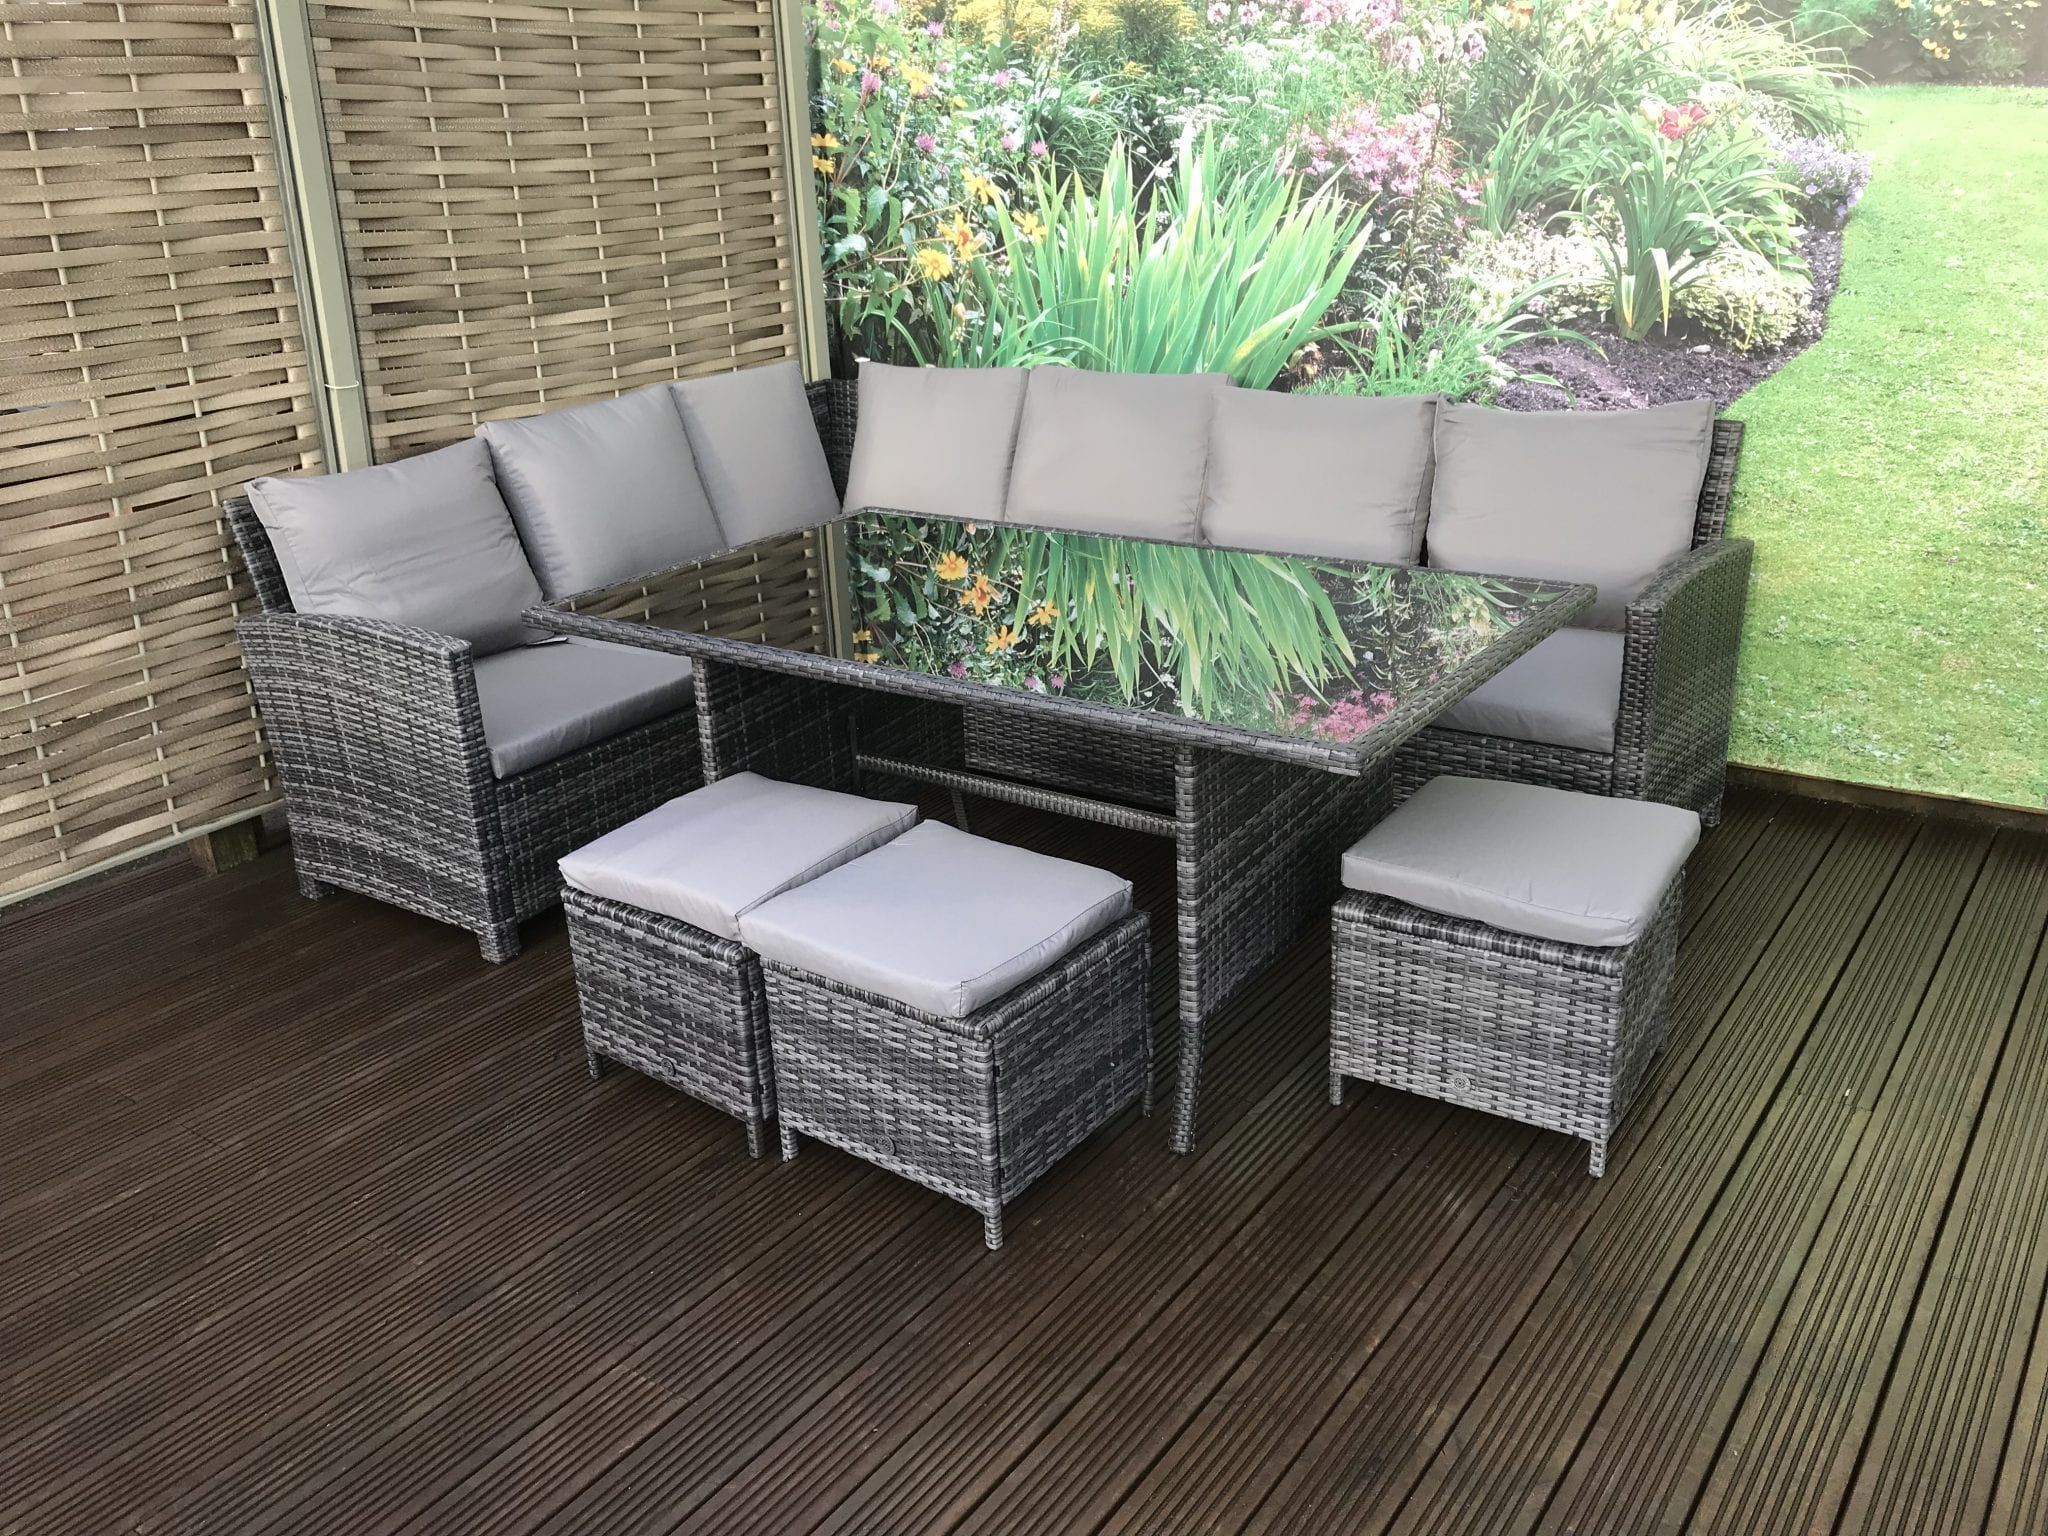 Homeflair Rattan Garden Furniture Charlotte Grey Corner Intended For Dining Sofa Chairs (Photo 14 of 15)